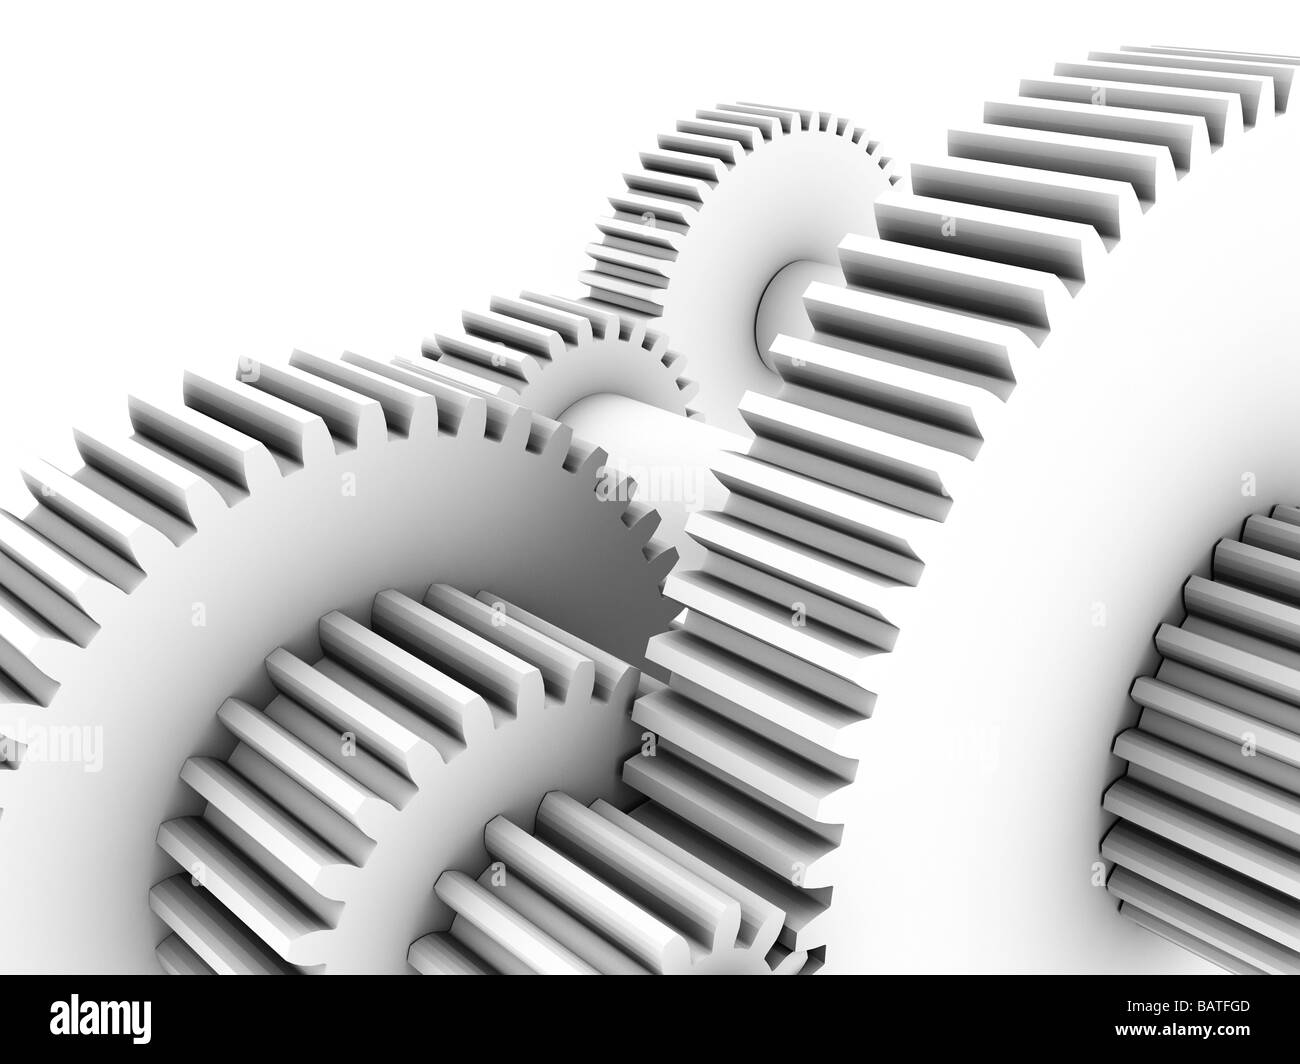 Gear wheels, computer artwork. Gear wheels, orcogs, transmit rotational force within machines. Stock Photo